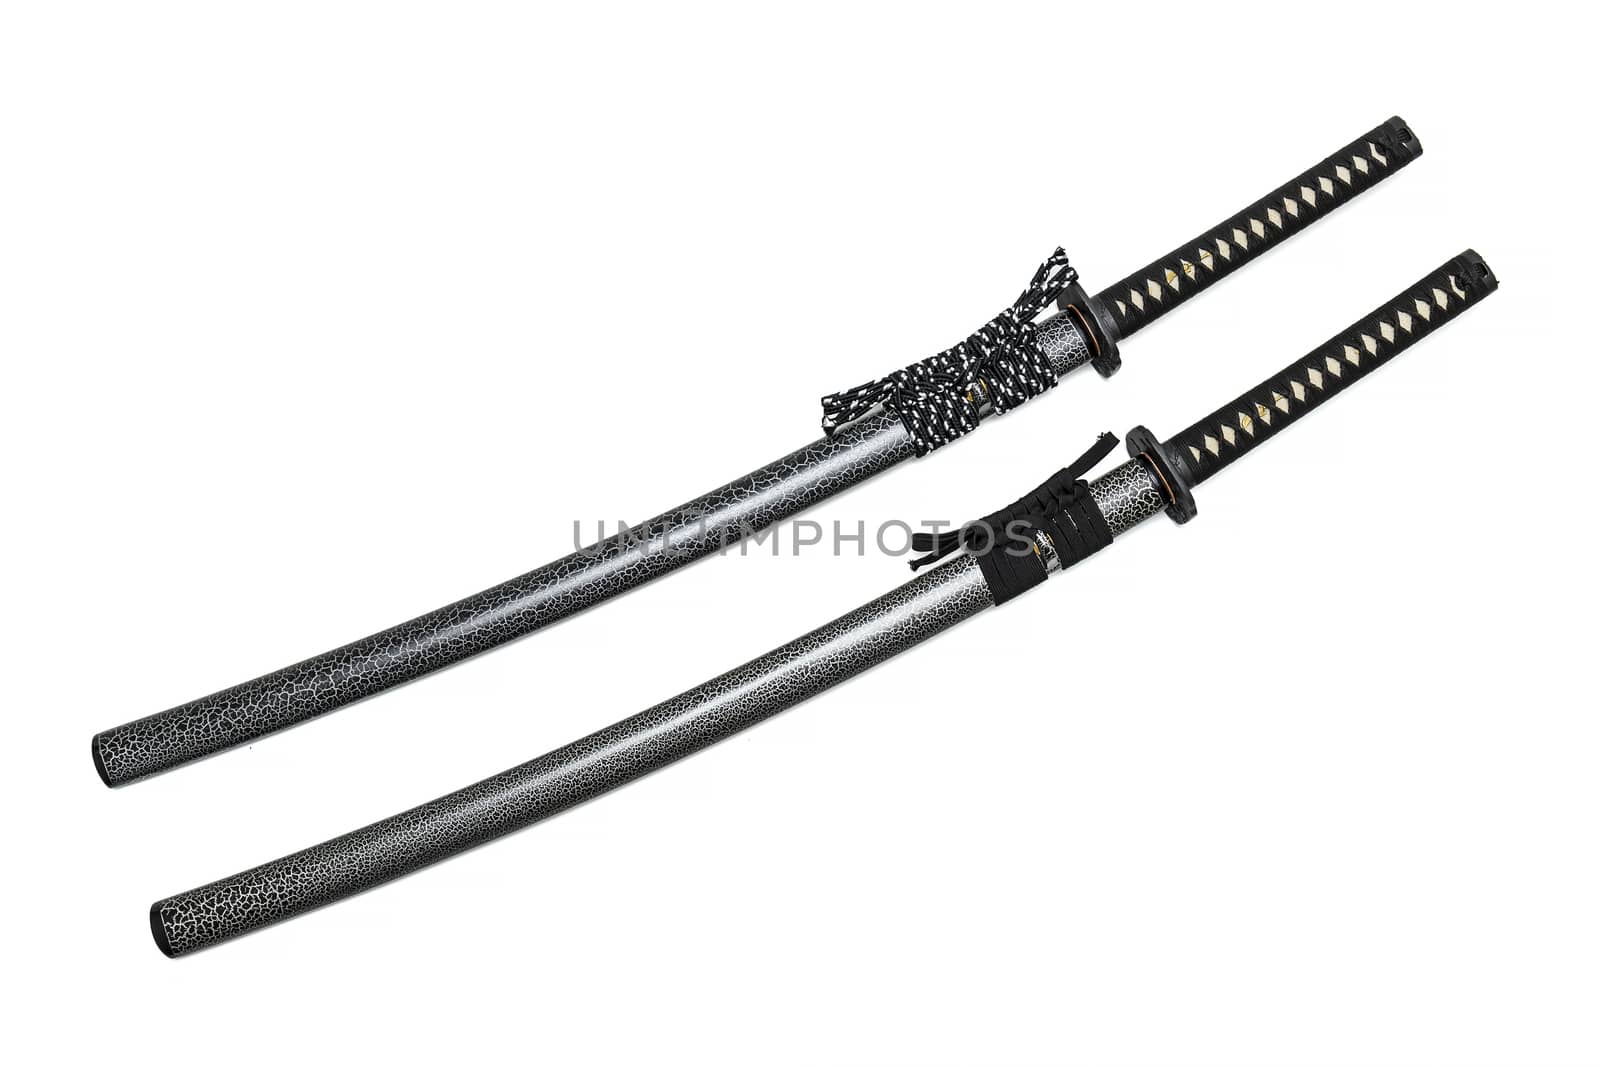 2 Japanese swords and scabbard with black and two-tone cord isolated in white background.